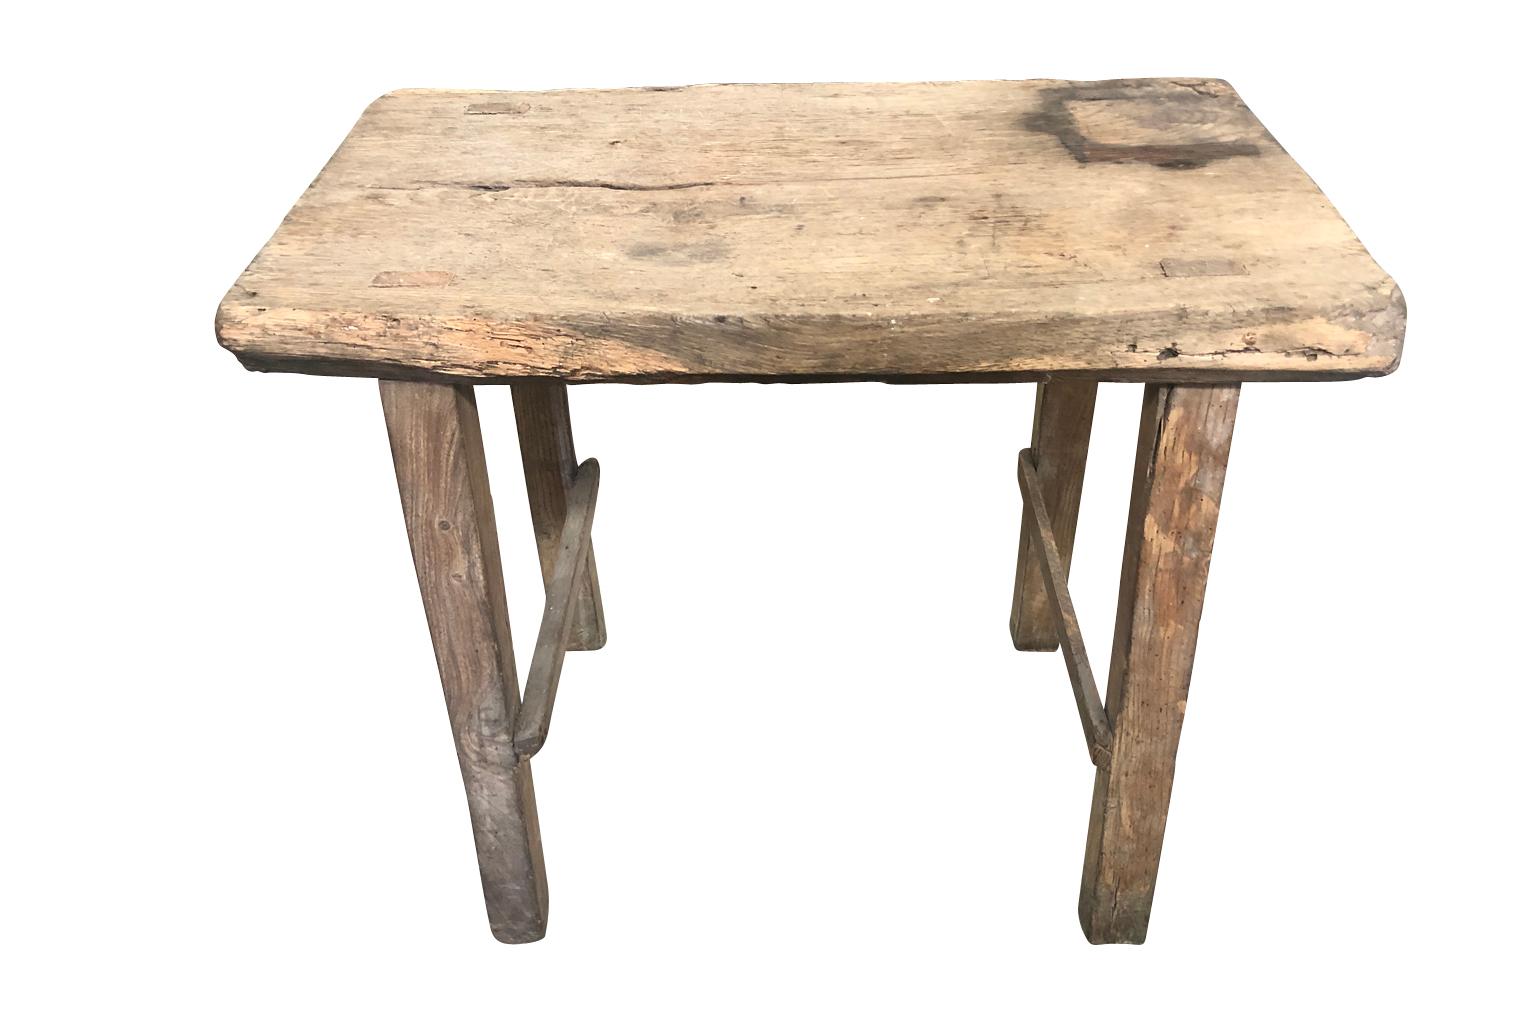 A charming and rustic early 20th century work table, side table from the Provence region of France. Soundly constructed from naturally washed oak. A wonderful piece for any rustic interior or covered porch.